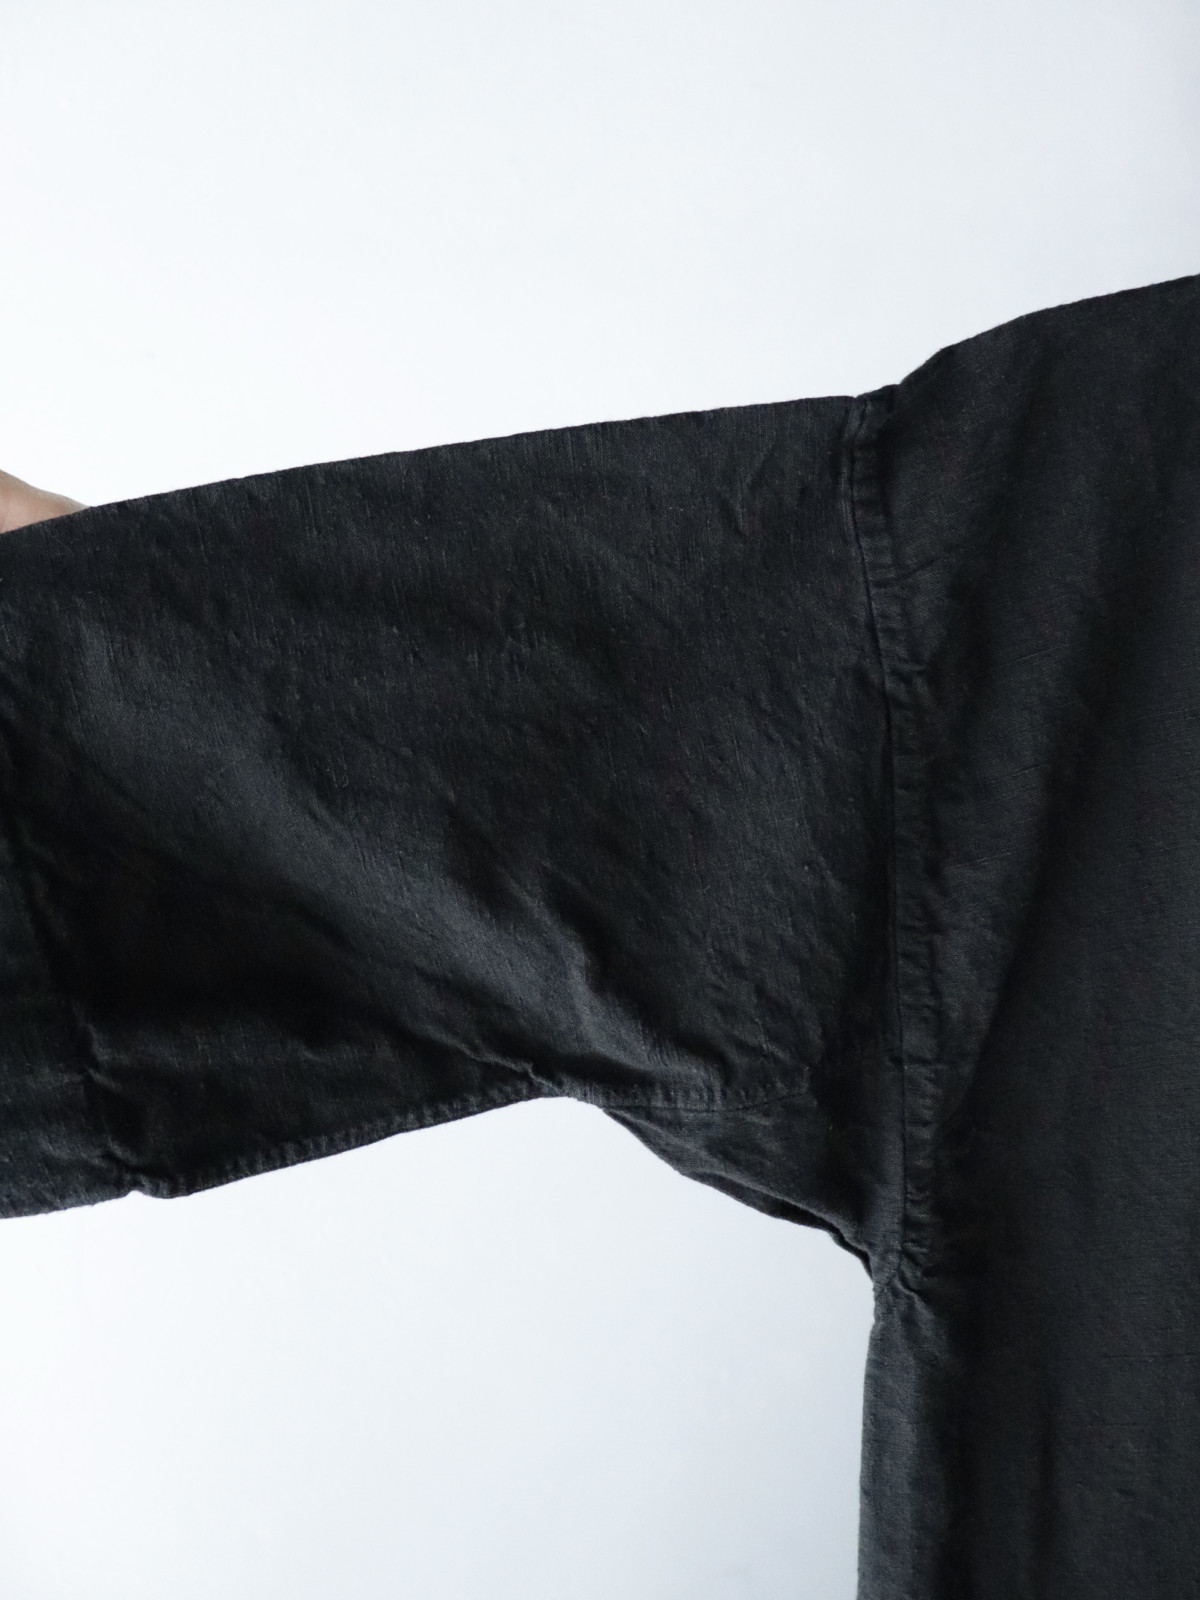 Black-dyed ,french linen fabric, one-piece